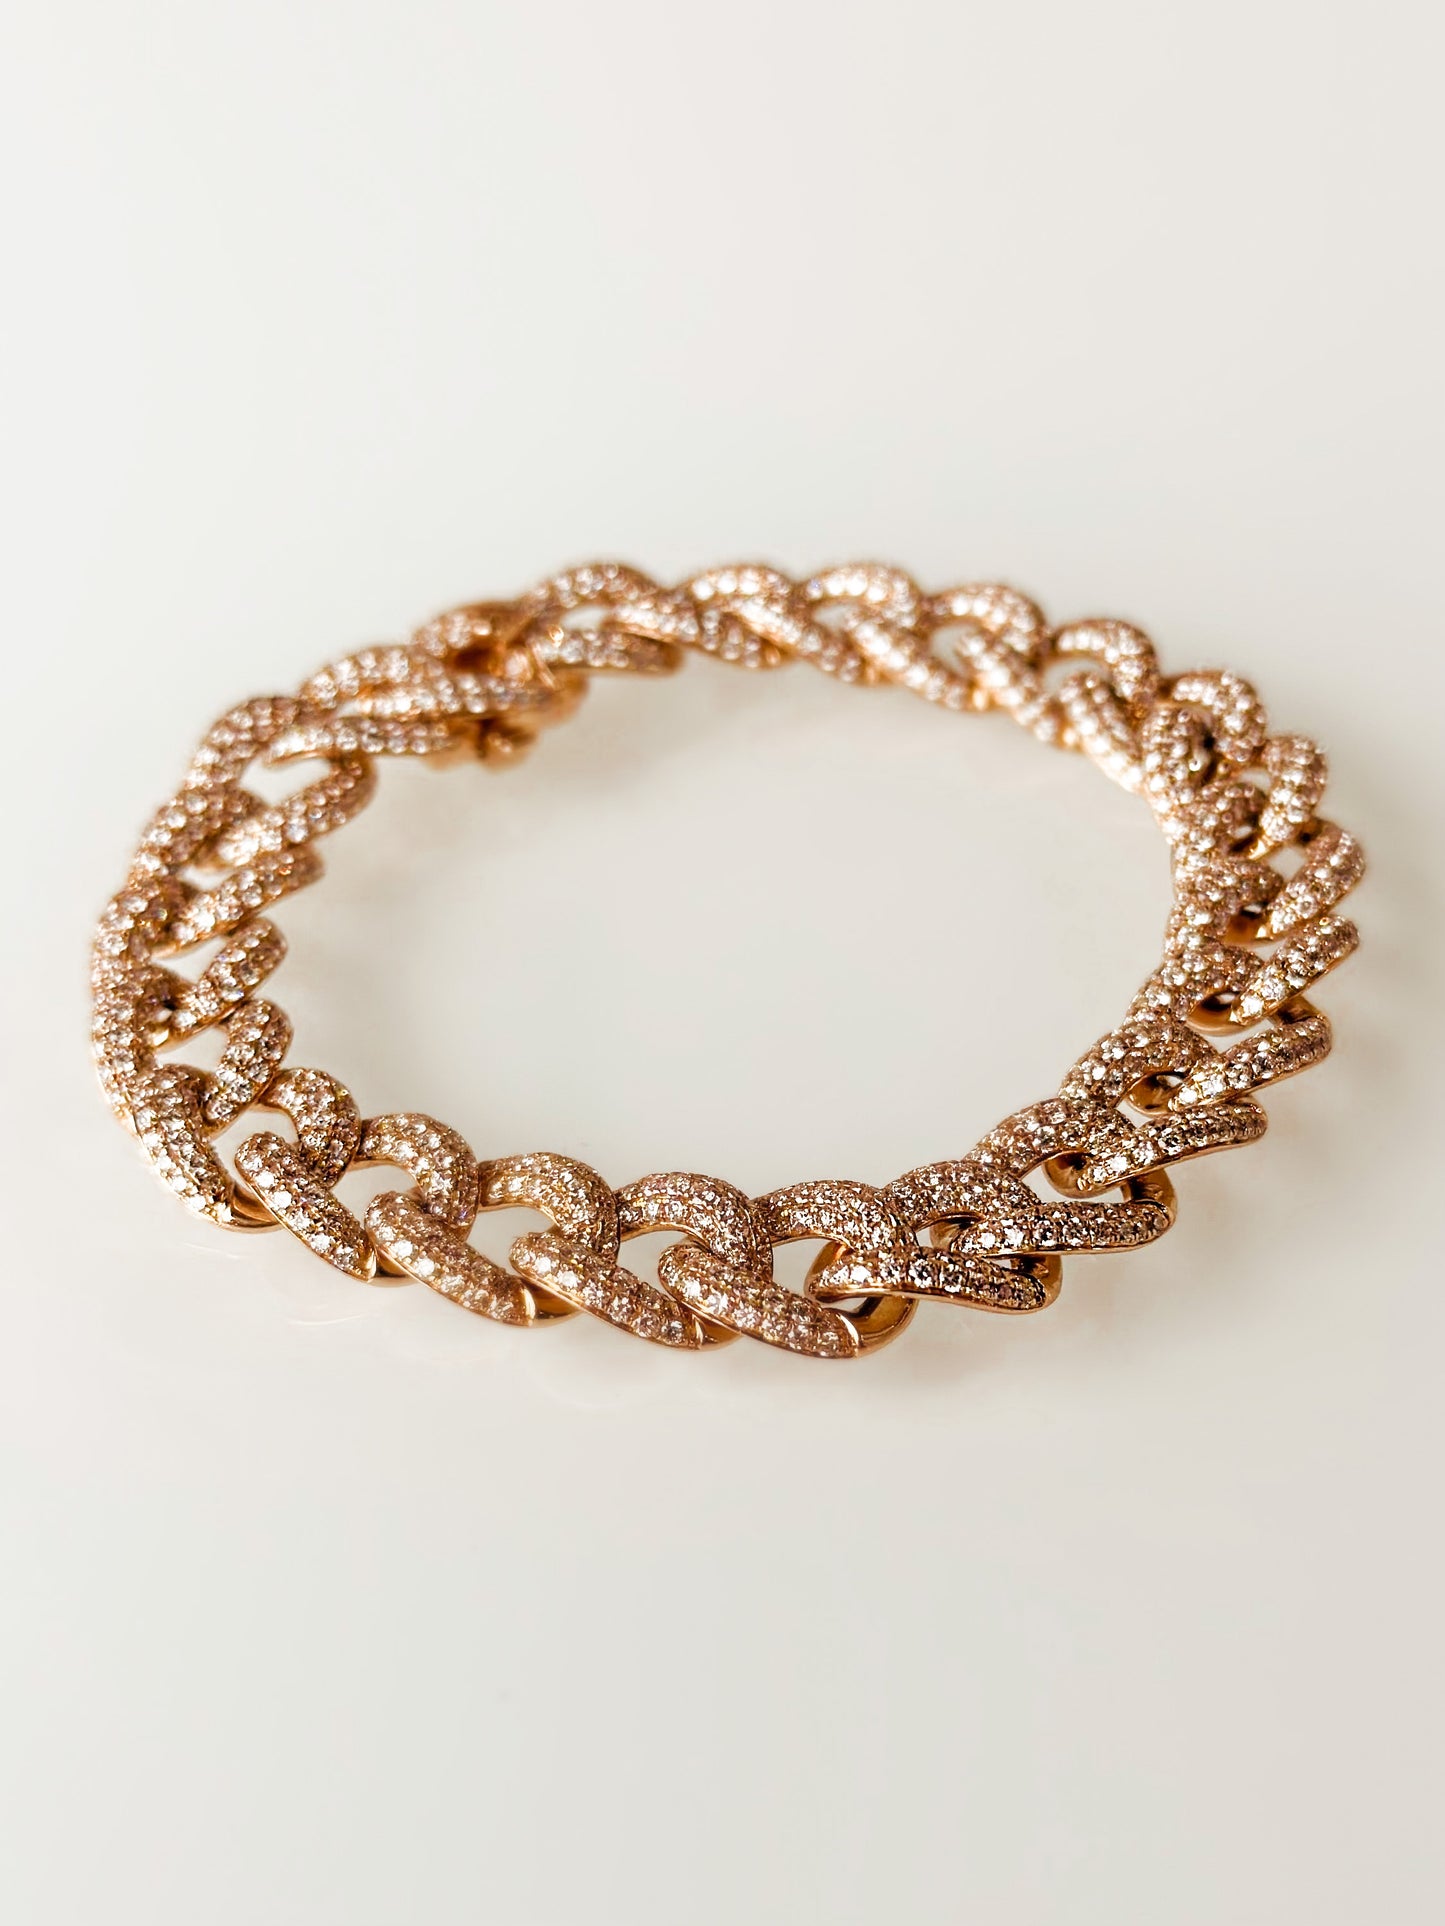 ROSET Opulence Link Bracelet in Yellow Gold and Diamonds